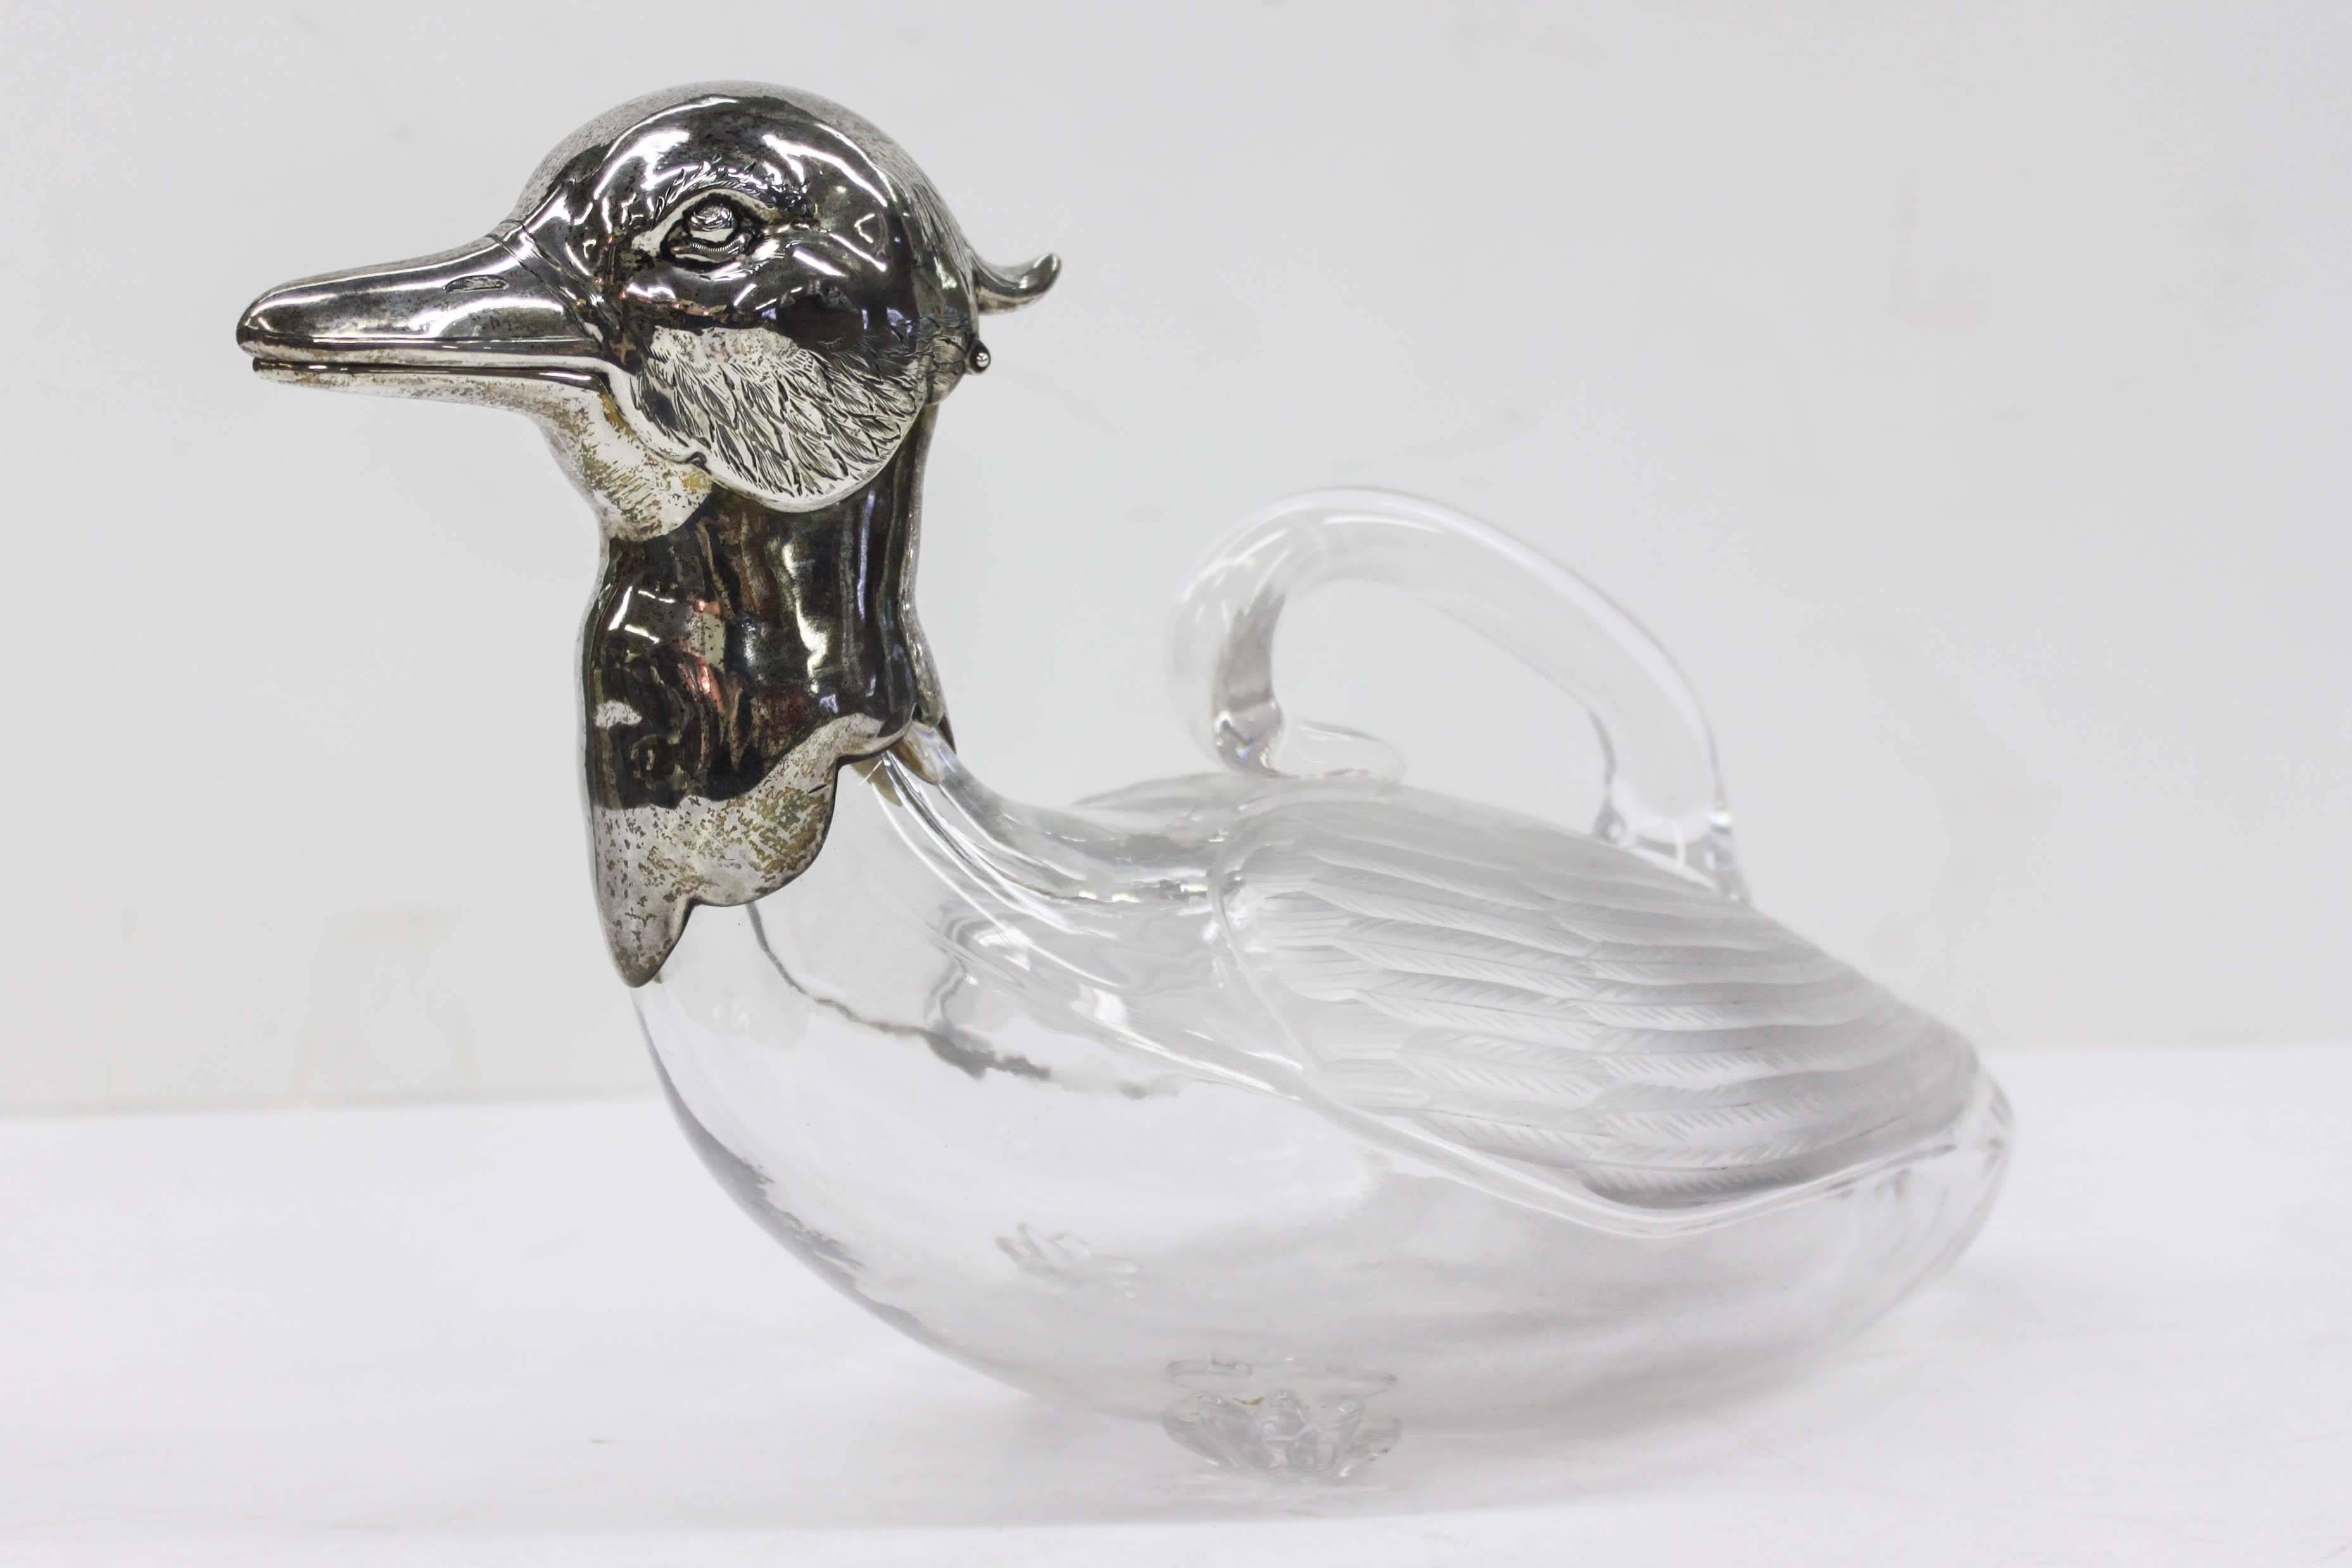 A rare early American crystal and sterling silver duck claret jug. Engraved silver head with cut crystal body, feet and formed handle. Beautiful original condition, no cracks or breaks in body, very heavy.